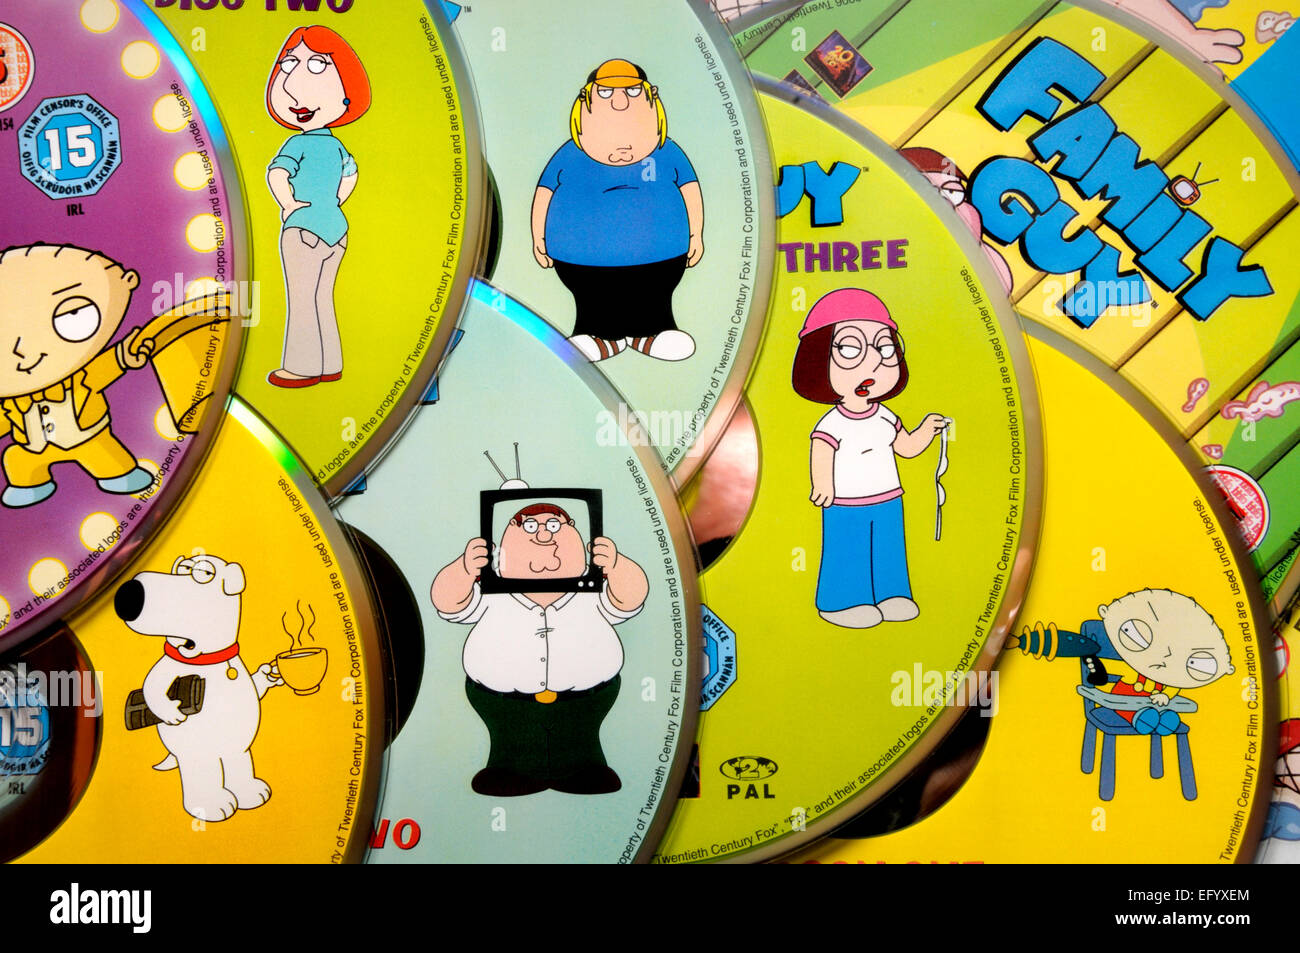 Family Guy DVDs, showing characters Stock Photo